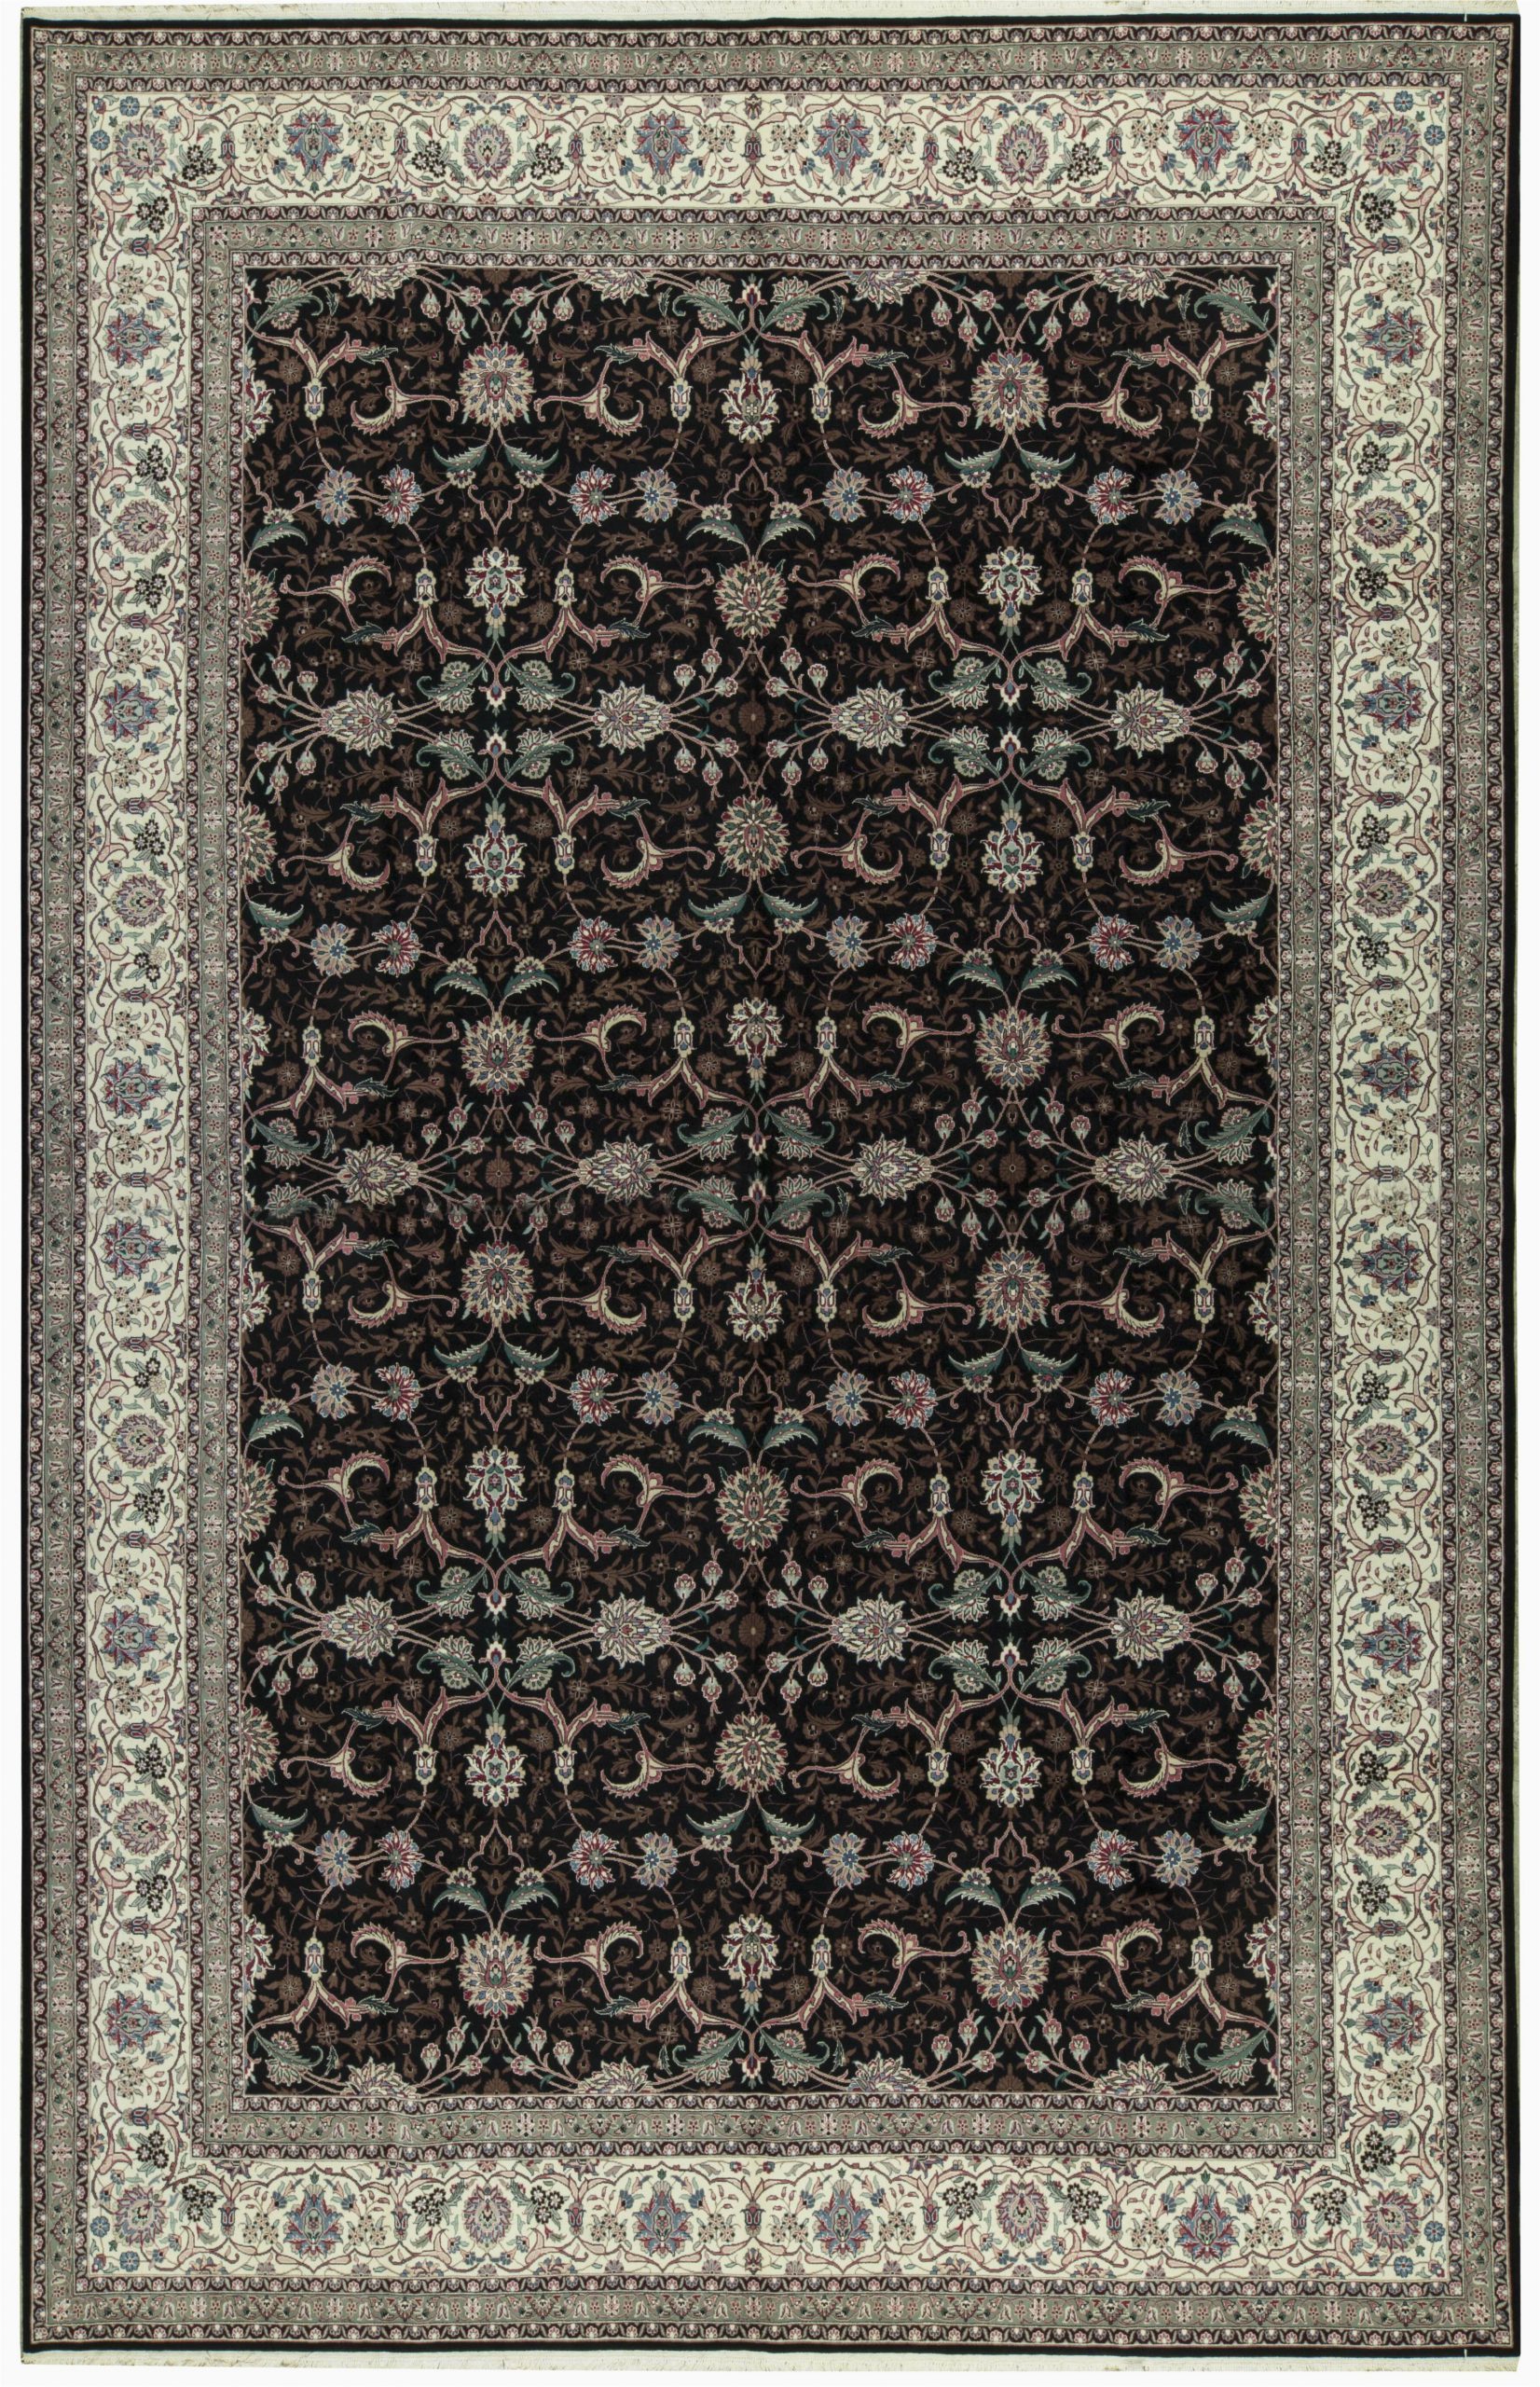 11 X 17 area Rugs E Of A Kind Jahan Handwoven 11 9" X 17 9" Wool Black Ivory area Rug